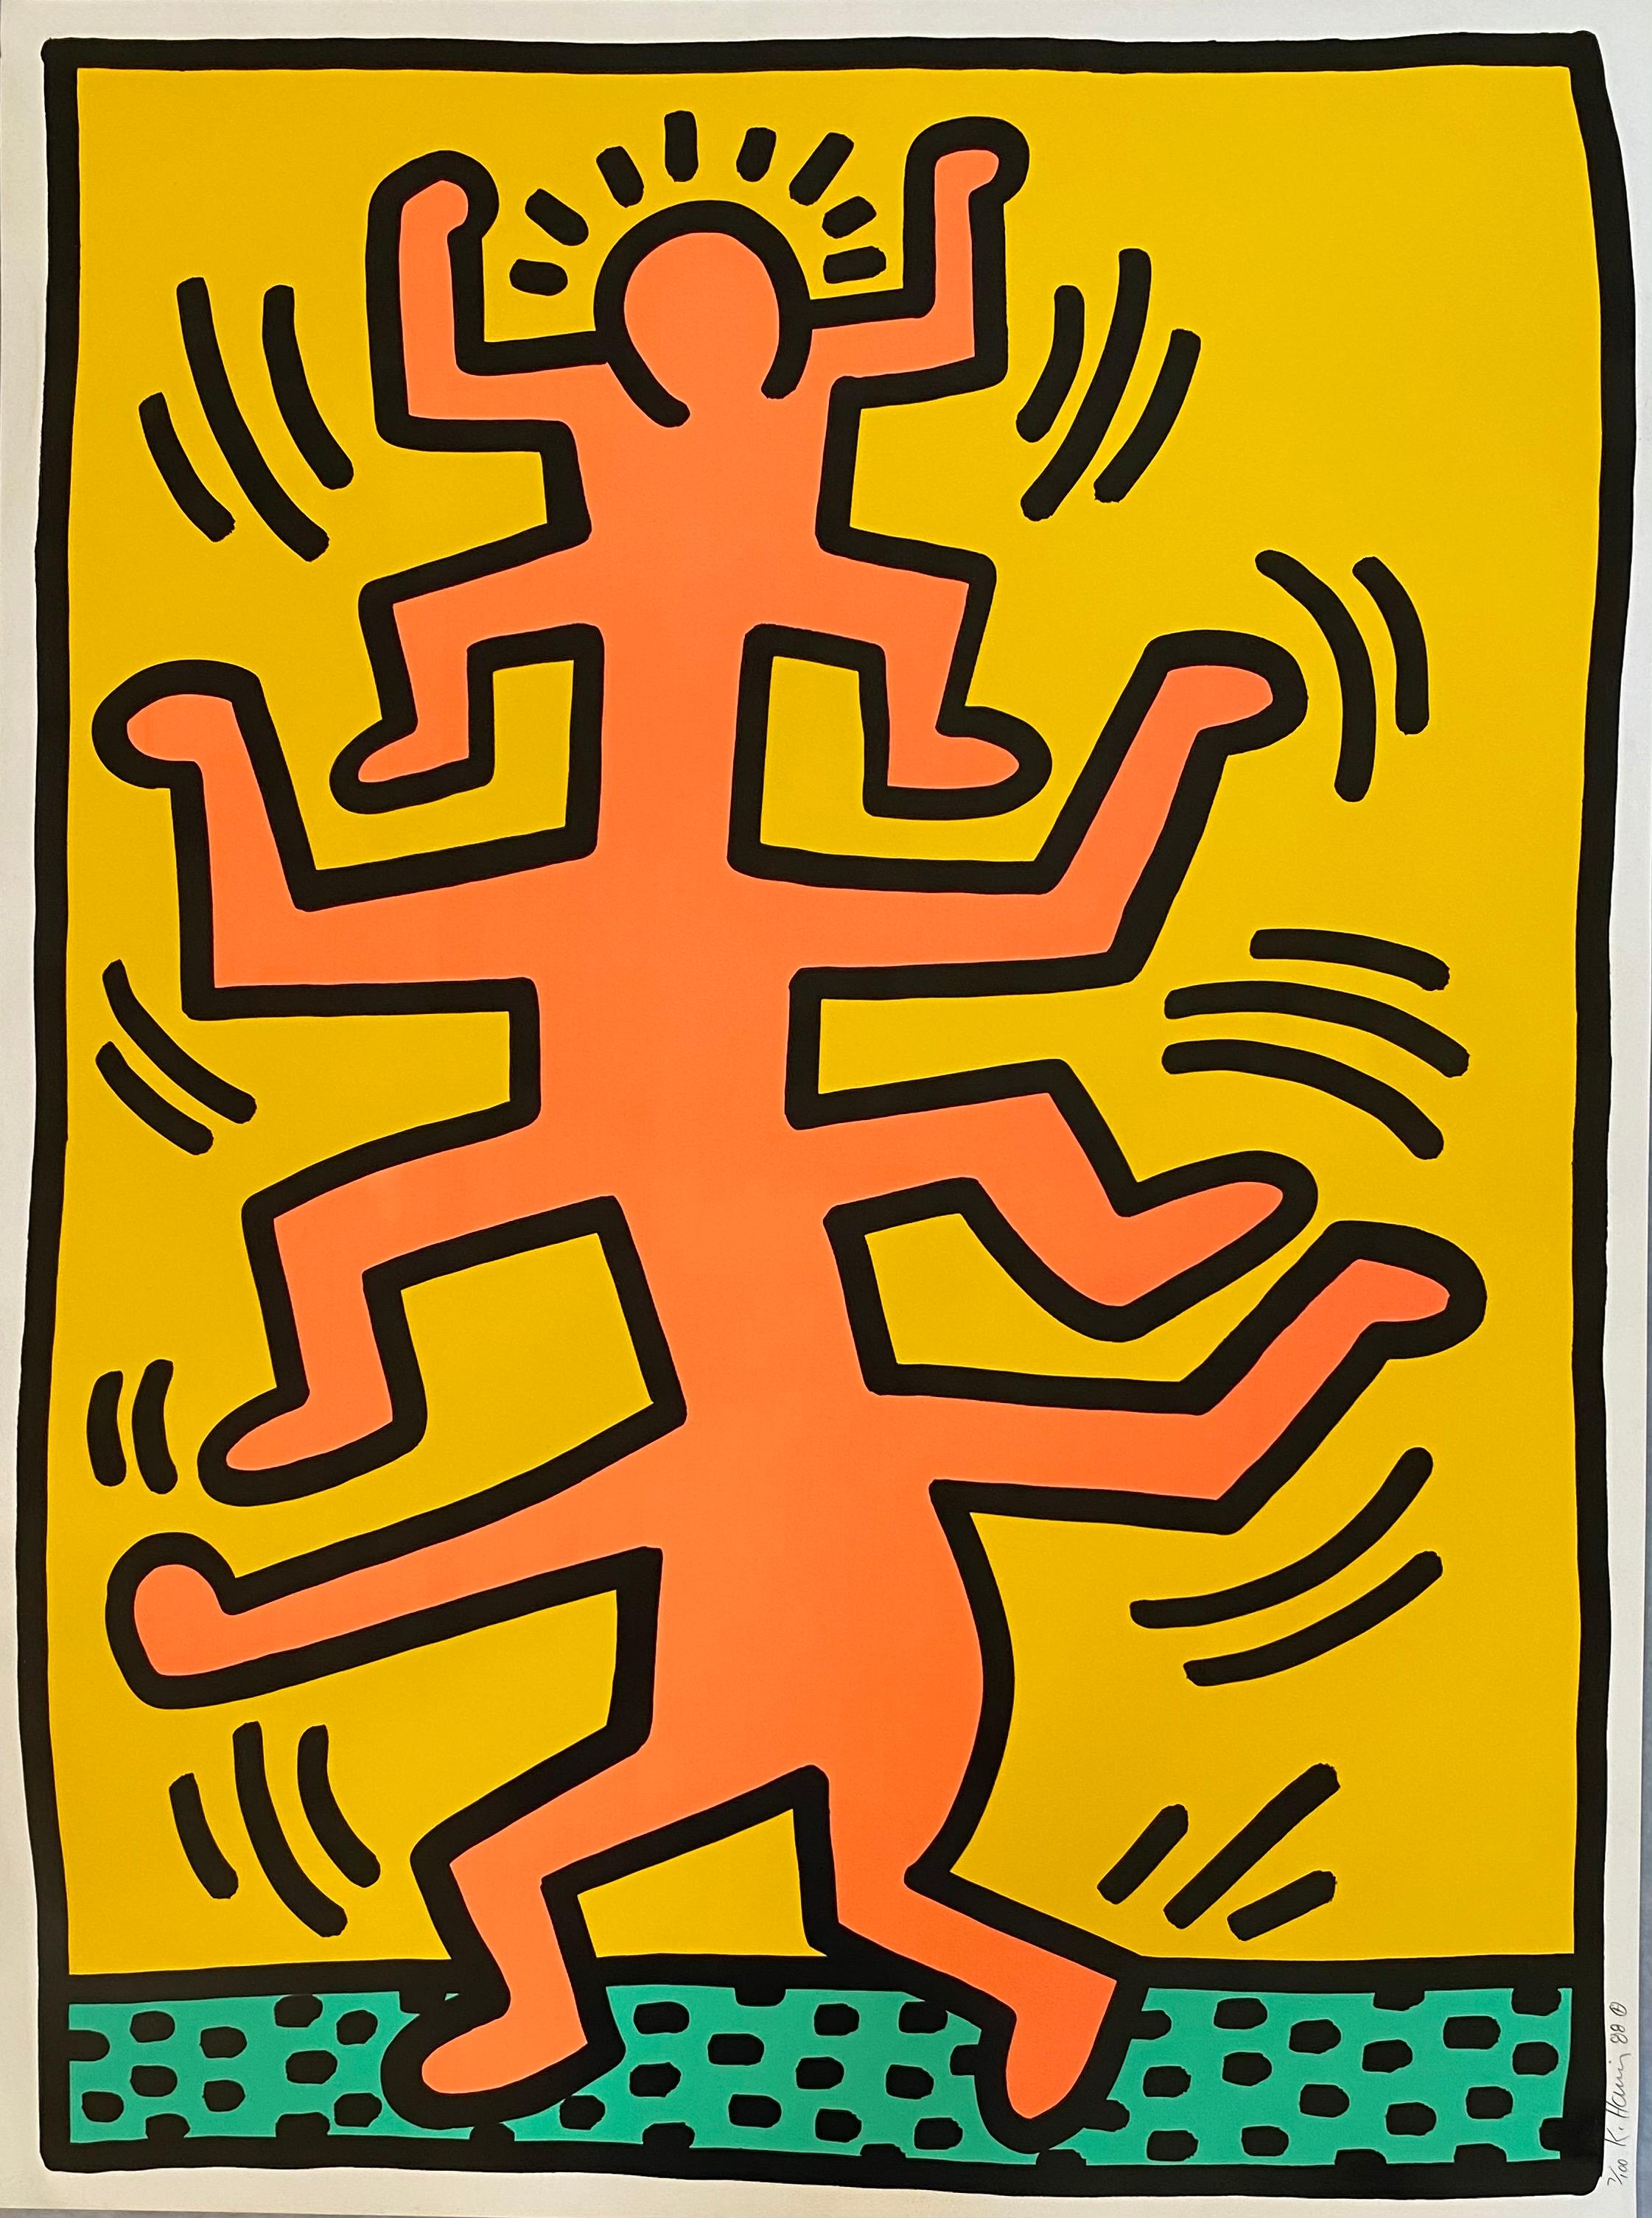 Keith Haring Portrait Print - Plate I, from Growing Suite